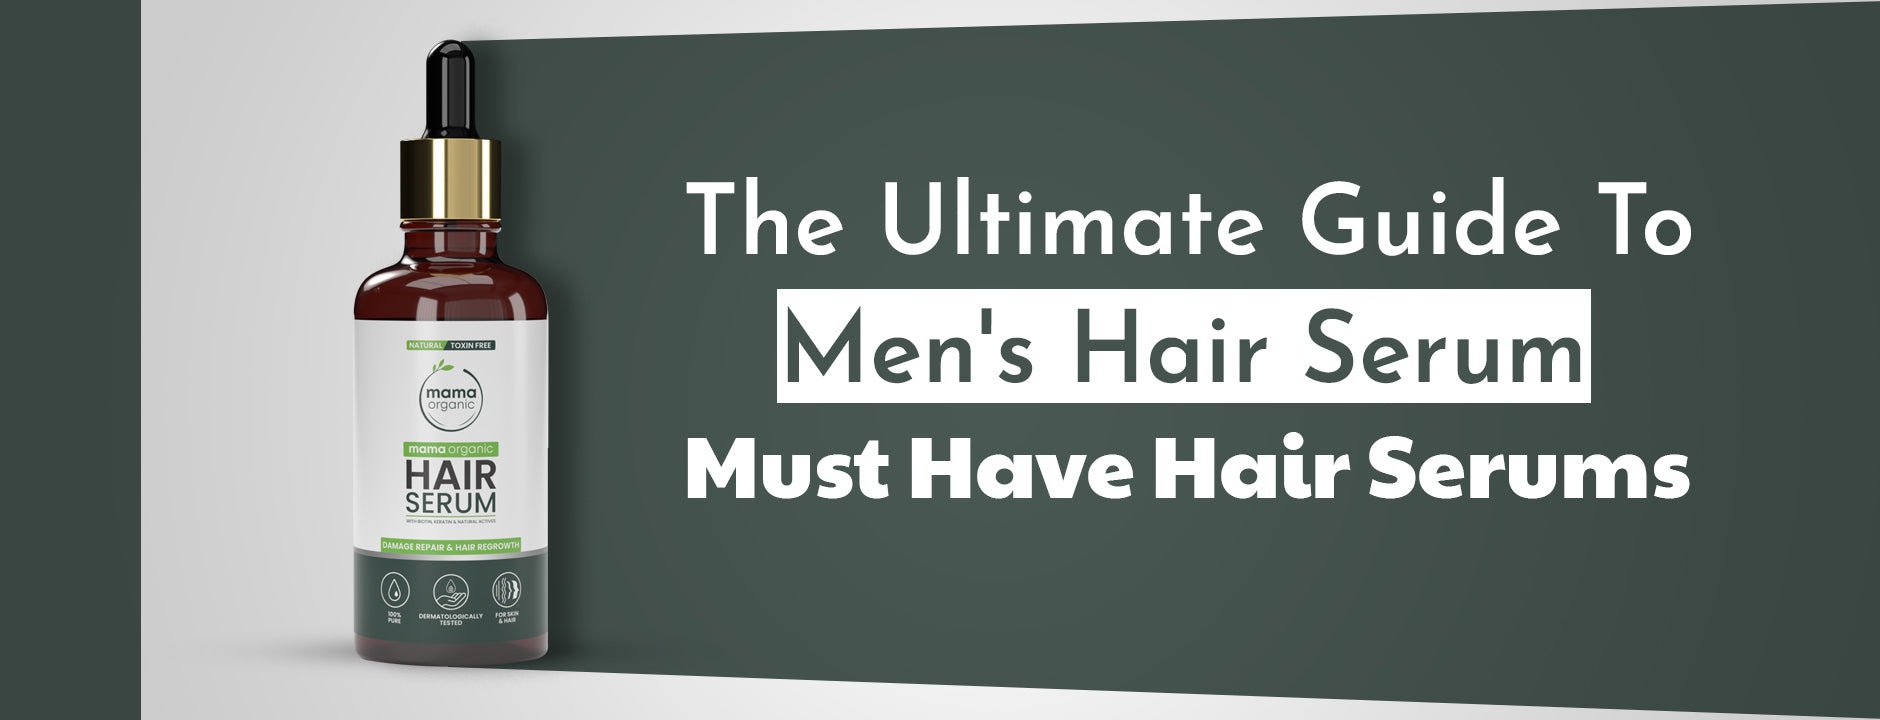 The Ultimate Guide to Men's Hair Serum | Must-Have Hair Serum